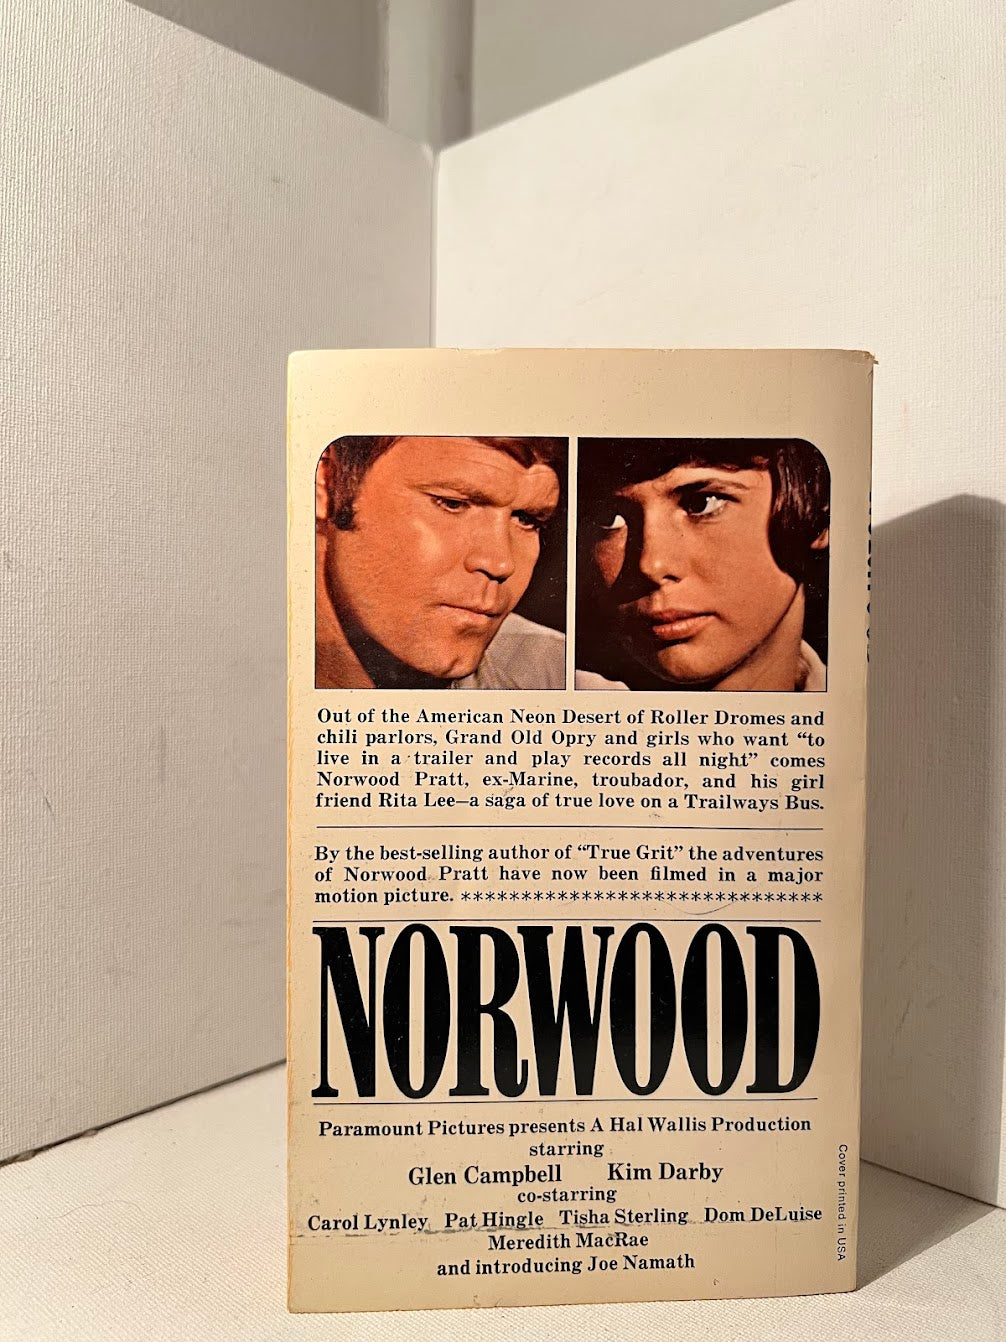 Norwood by Charles Portis